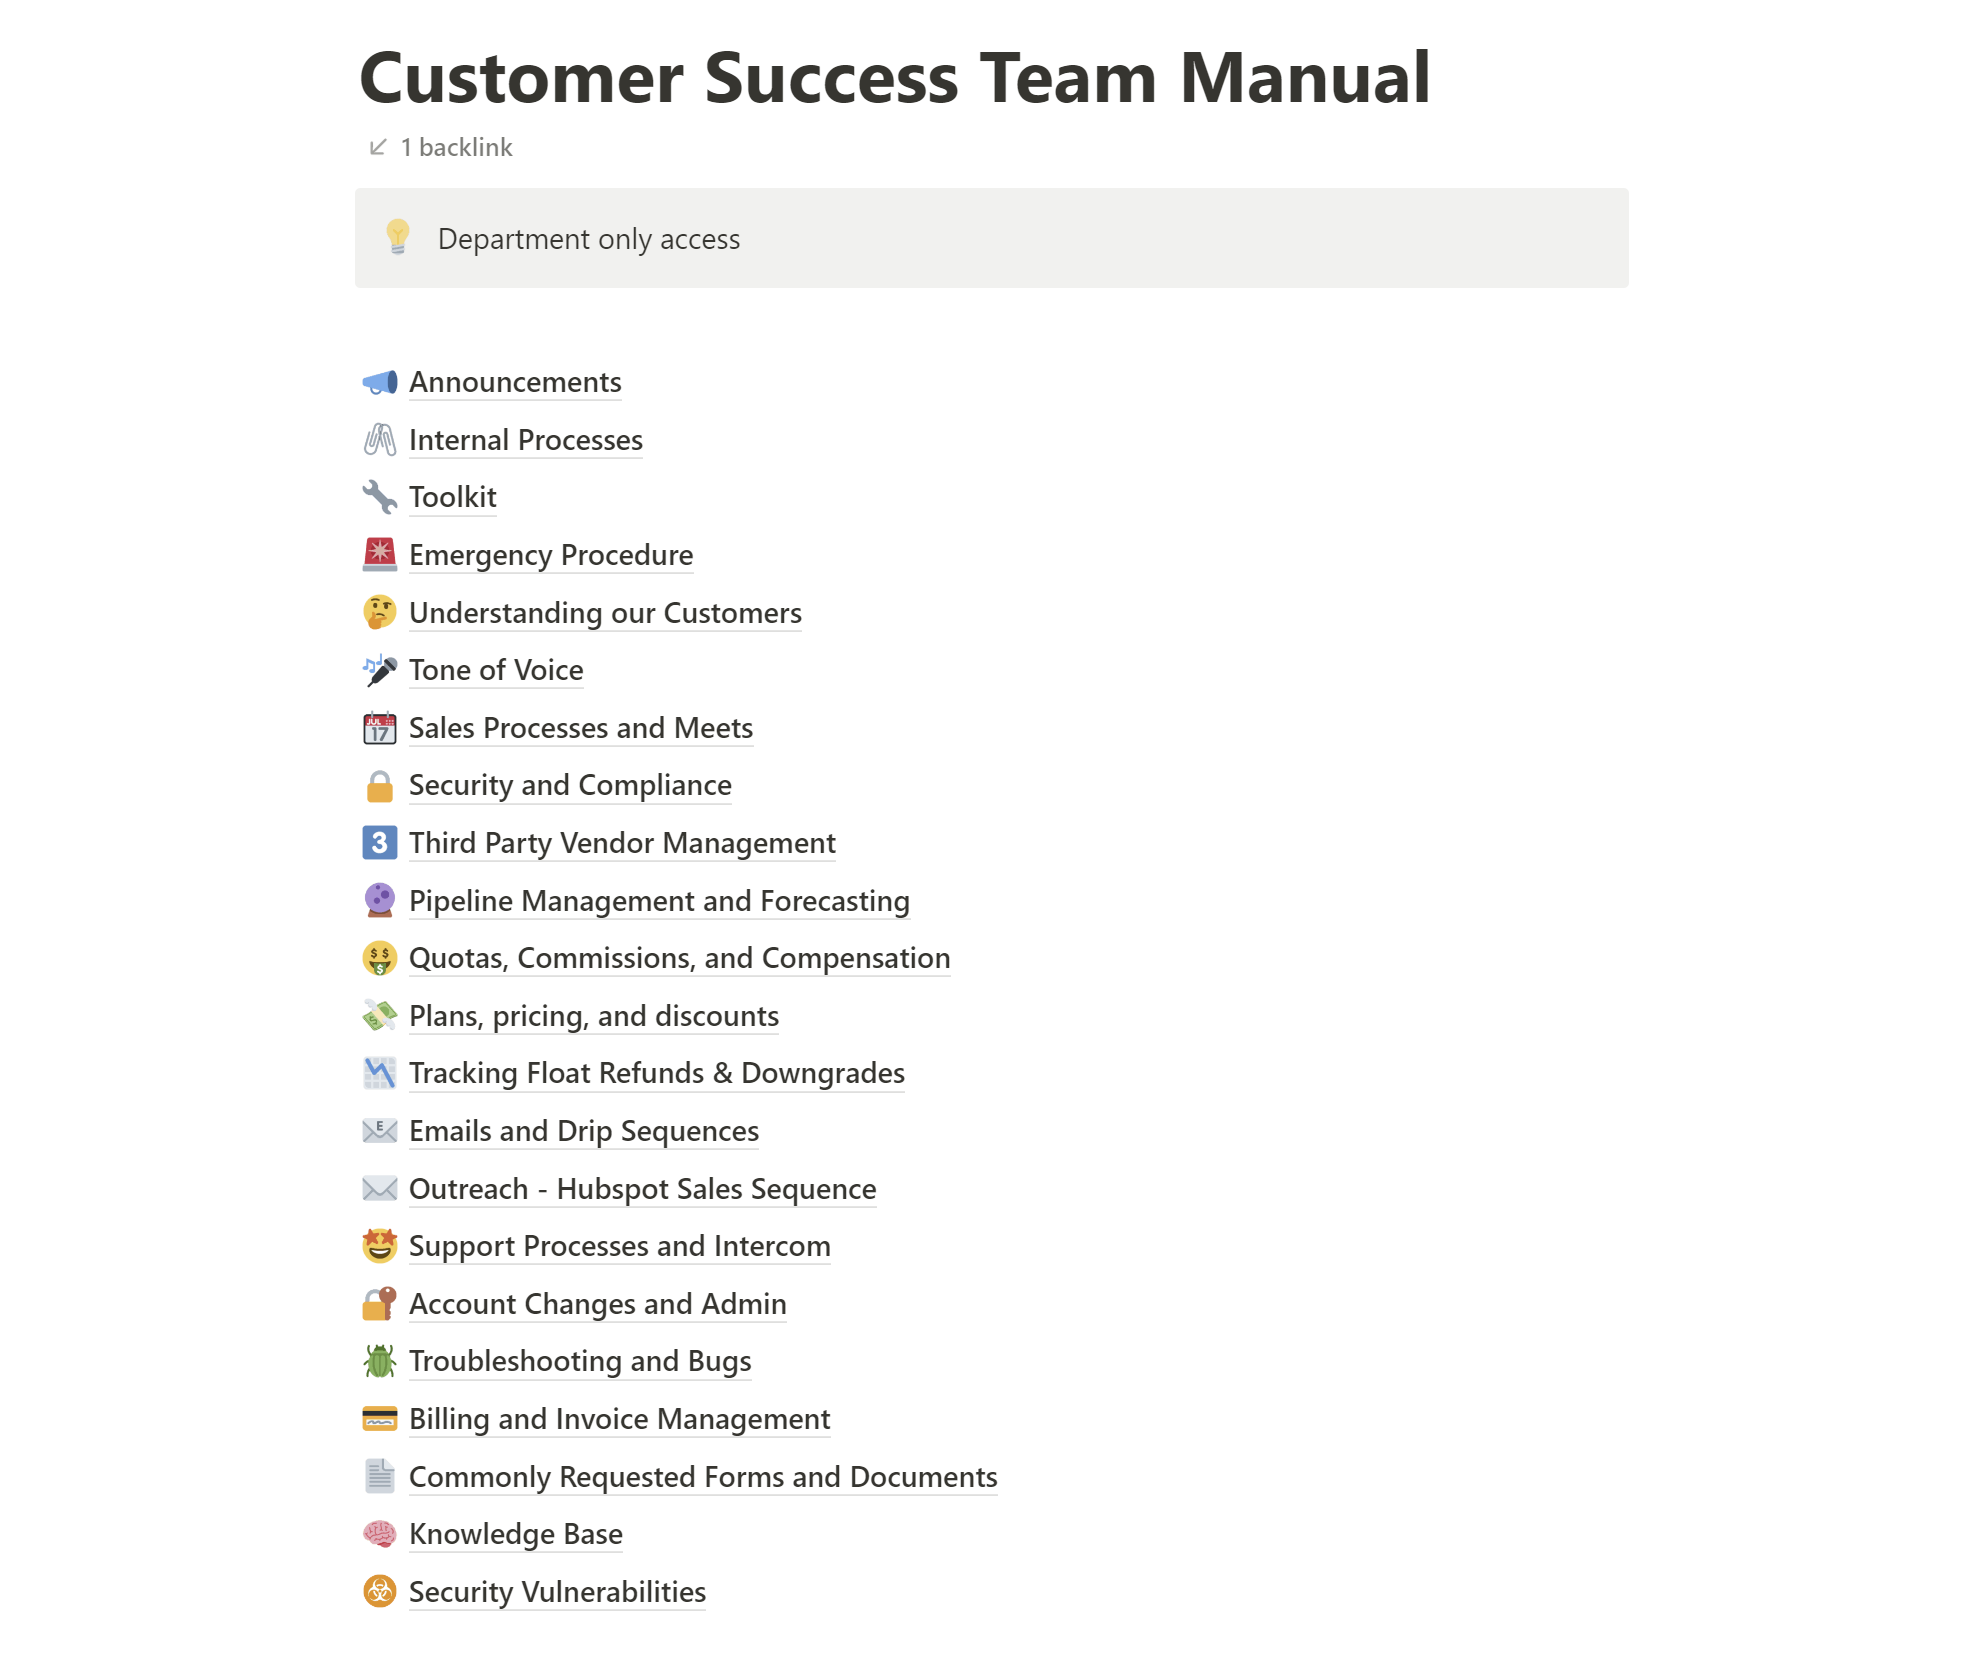 Making the Most of Our Customer Success Team’s Time